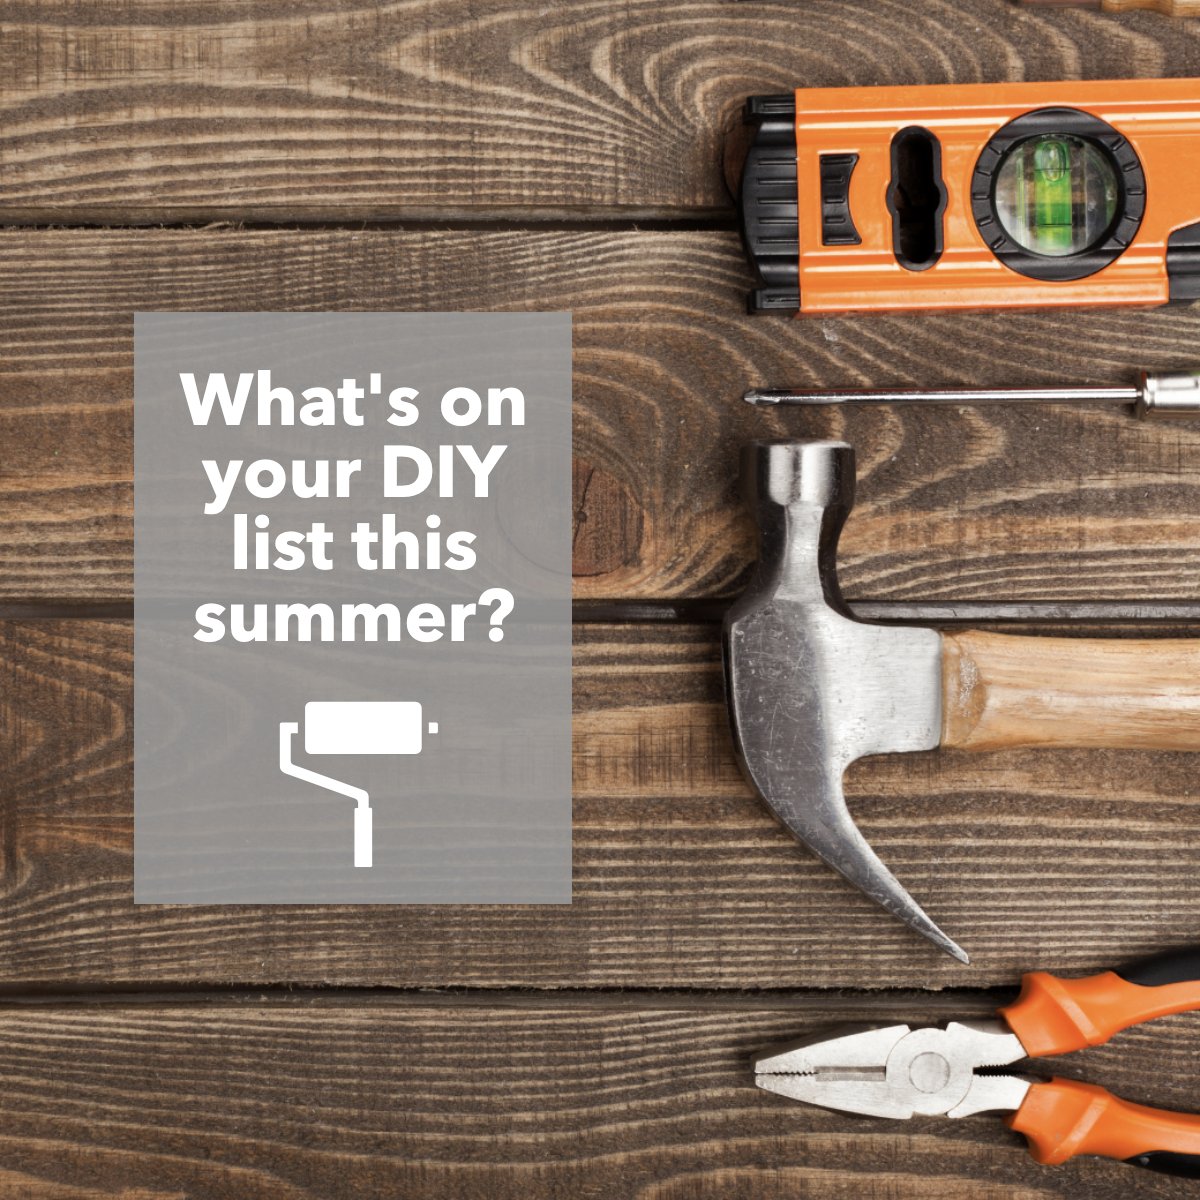 Tell us all about your summer projects ☀️! 

#question   #DIY   #DIYproject   #fixerupper   #tools

#TownsendTeam #iloverealestate #Toronto #Vaughan #Mississauga #Brampton #Caledon #TorontoLife #Tdot #905 #416 #the6ix #the6 #CallRoger #milliondollaragent #topproducer